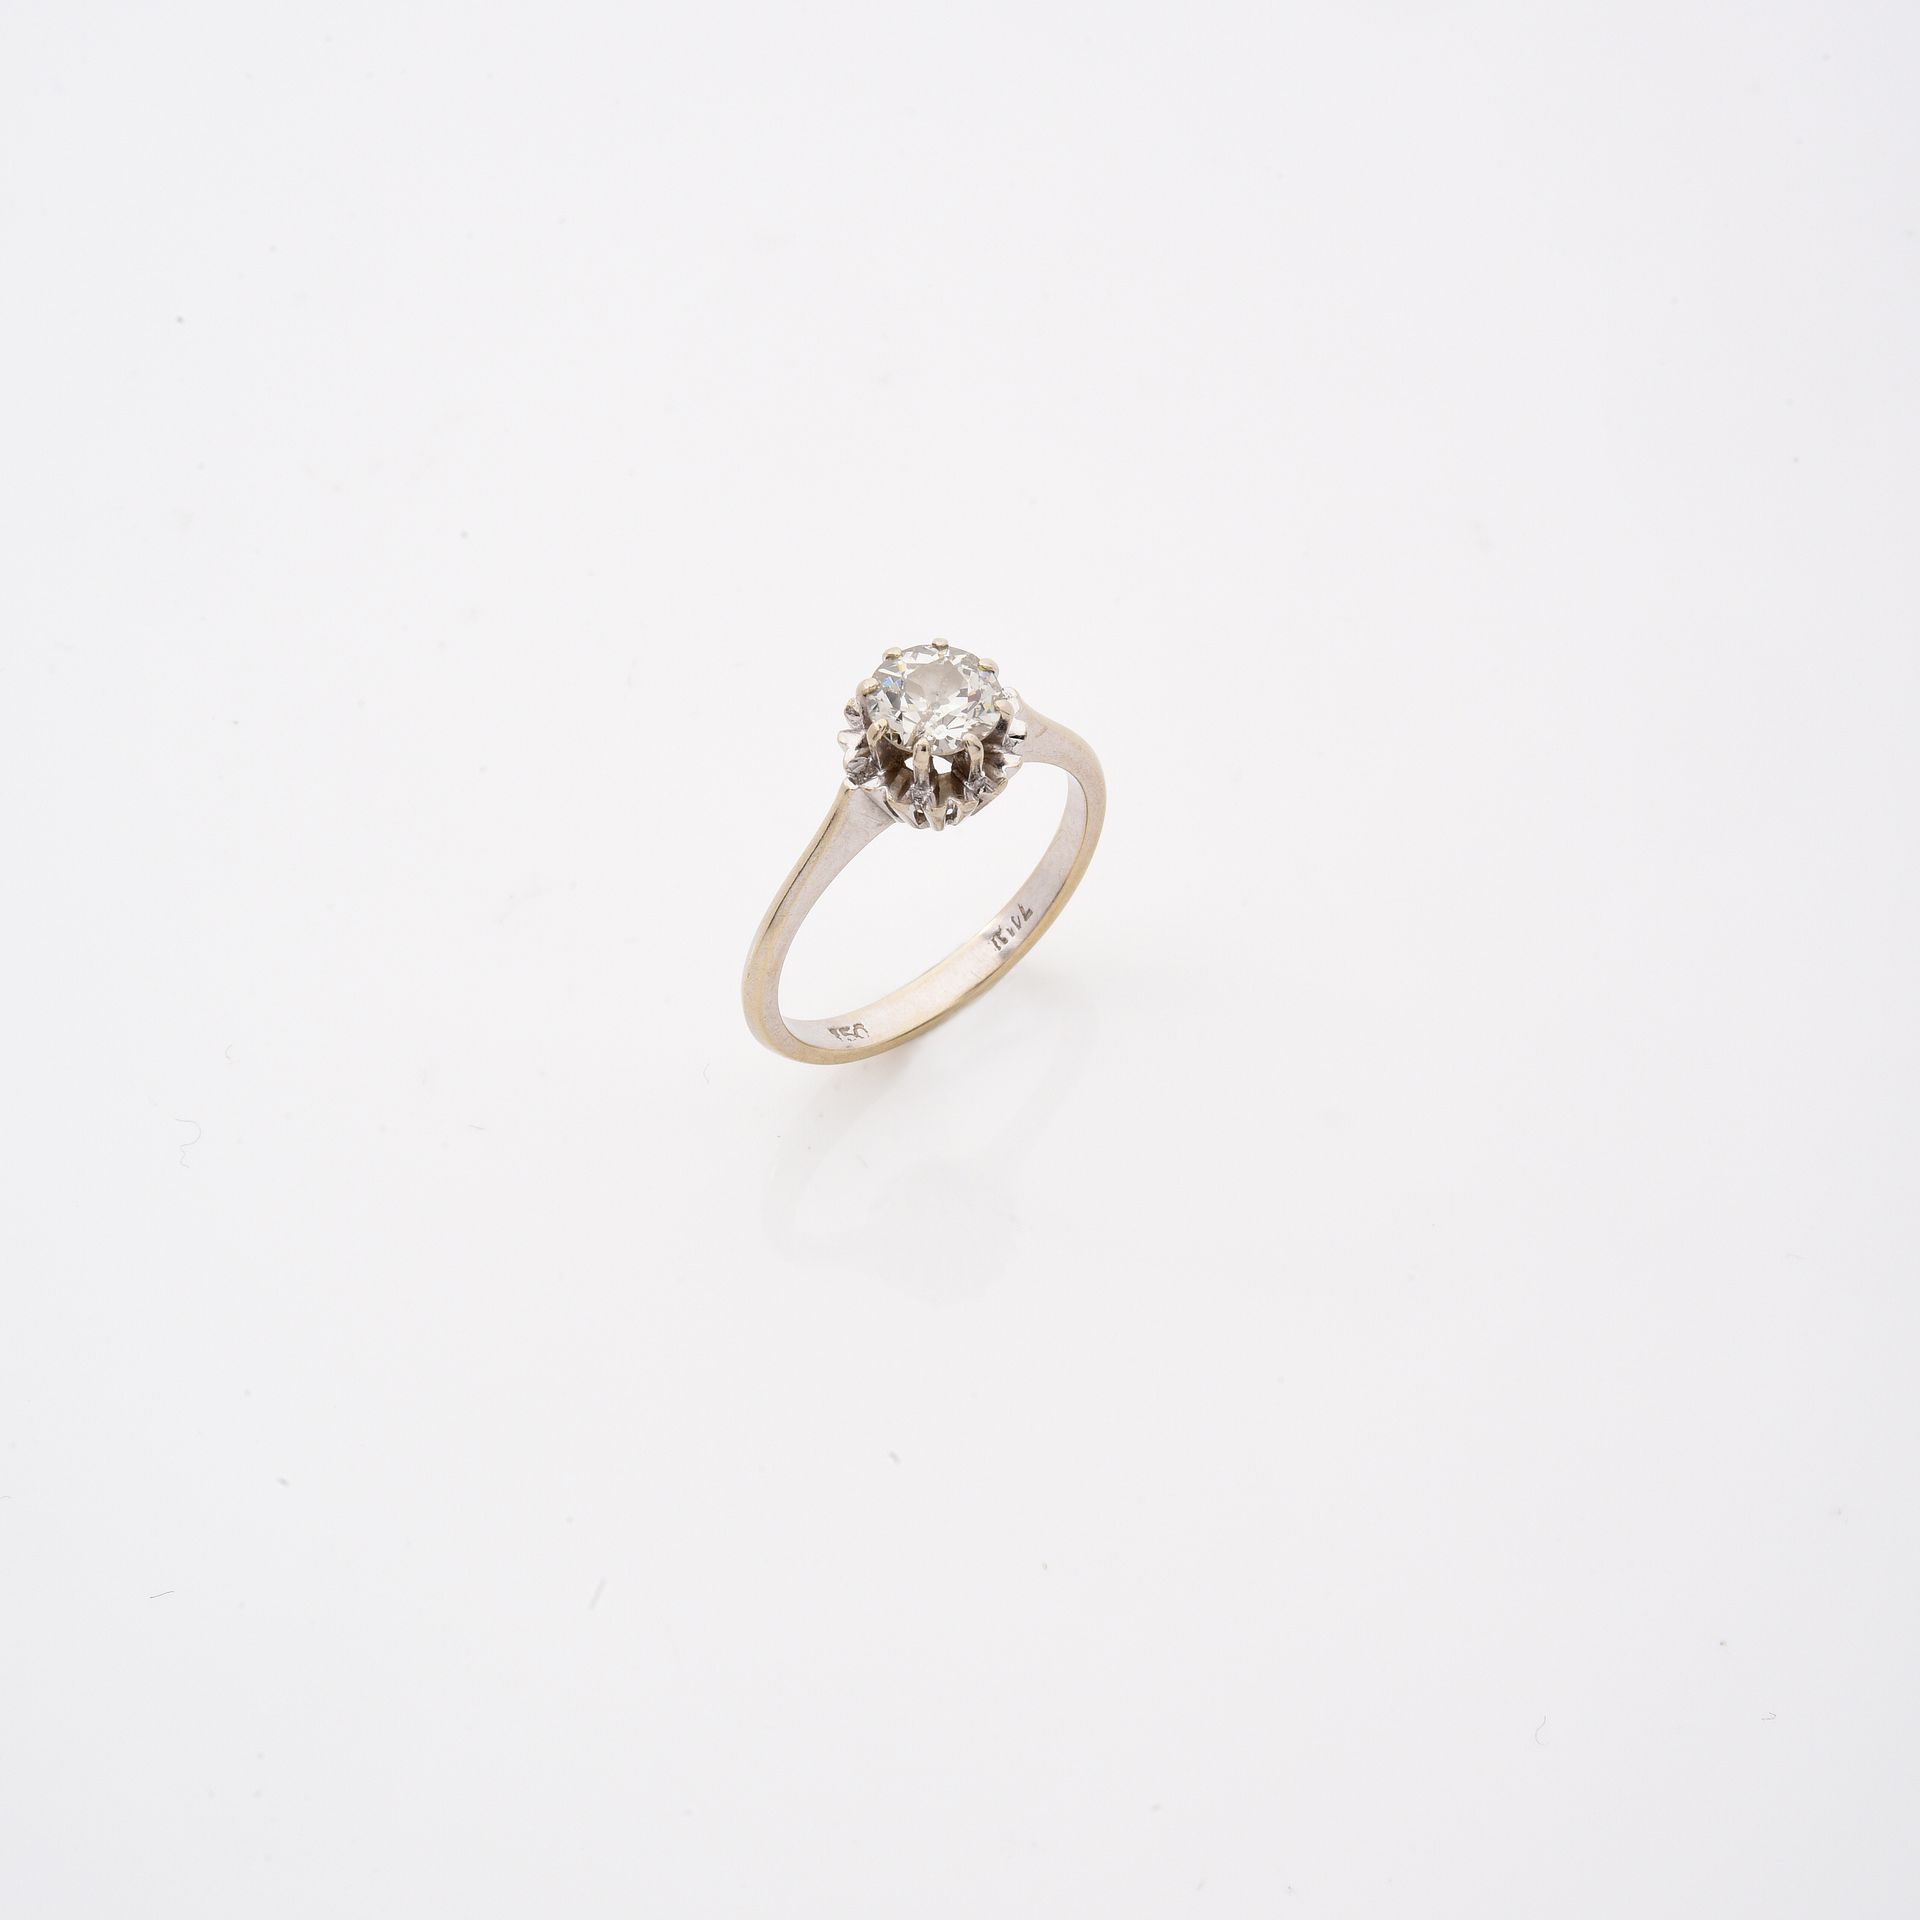 Null SOLITAIRE RING
in white gold, set with a half-cut diamond weighing approxim&hellip;